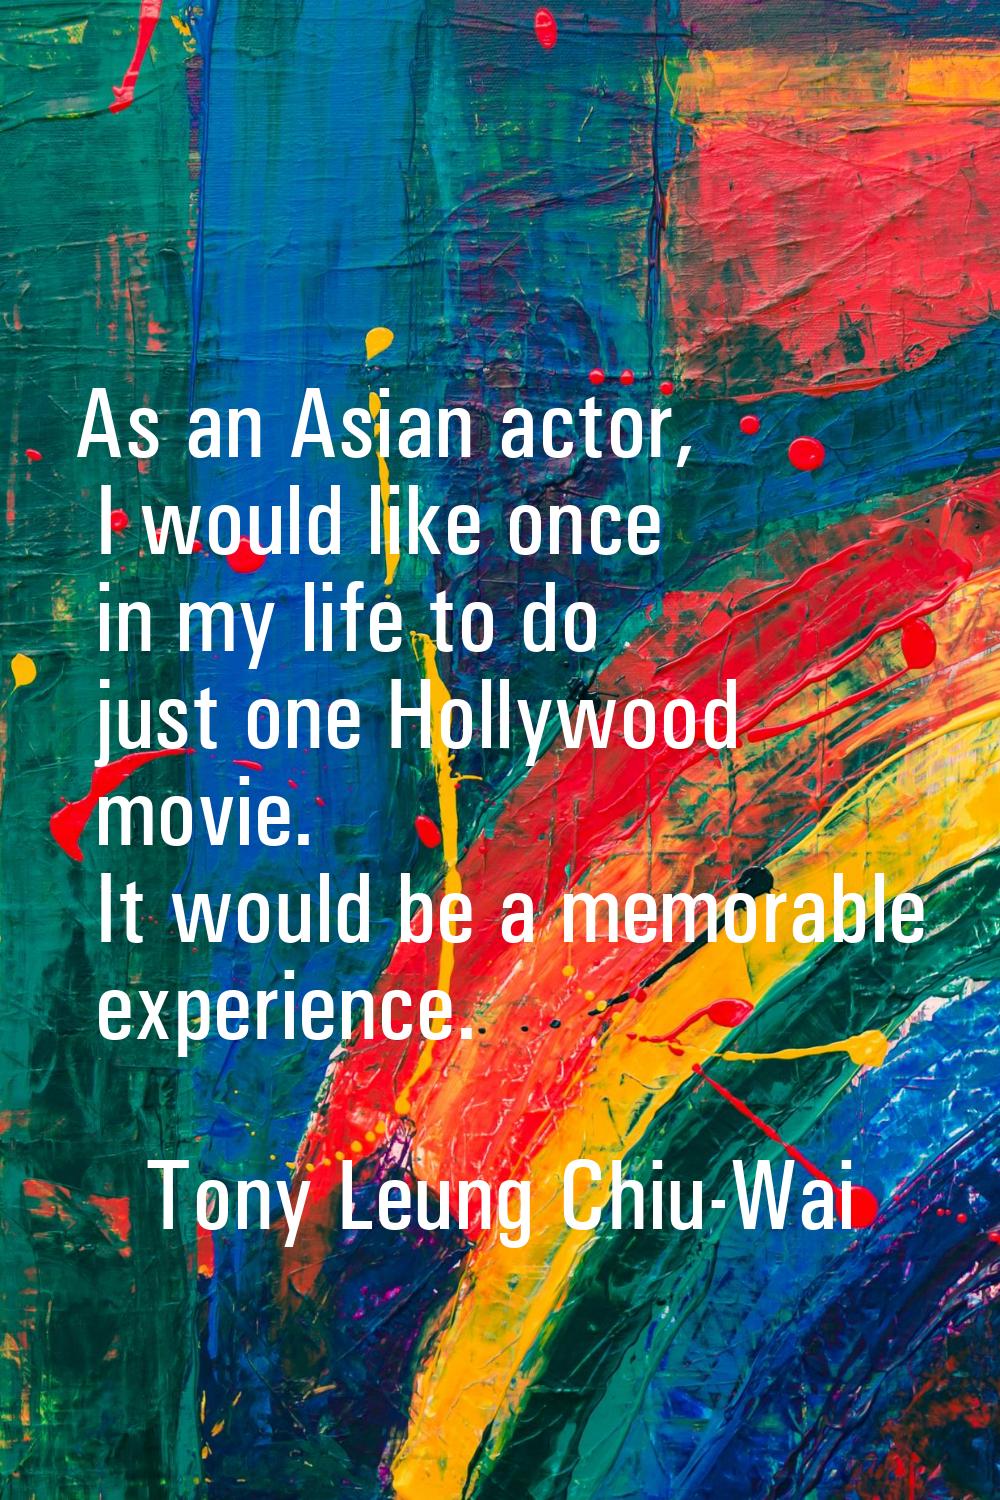 As an Asian actor, I would like once in my life to do just one Hollywood movie. It would be a memor